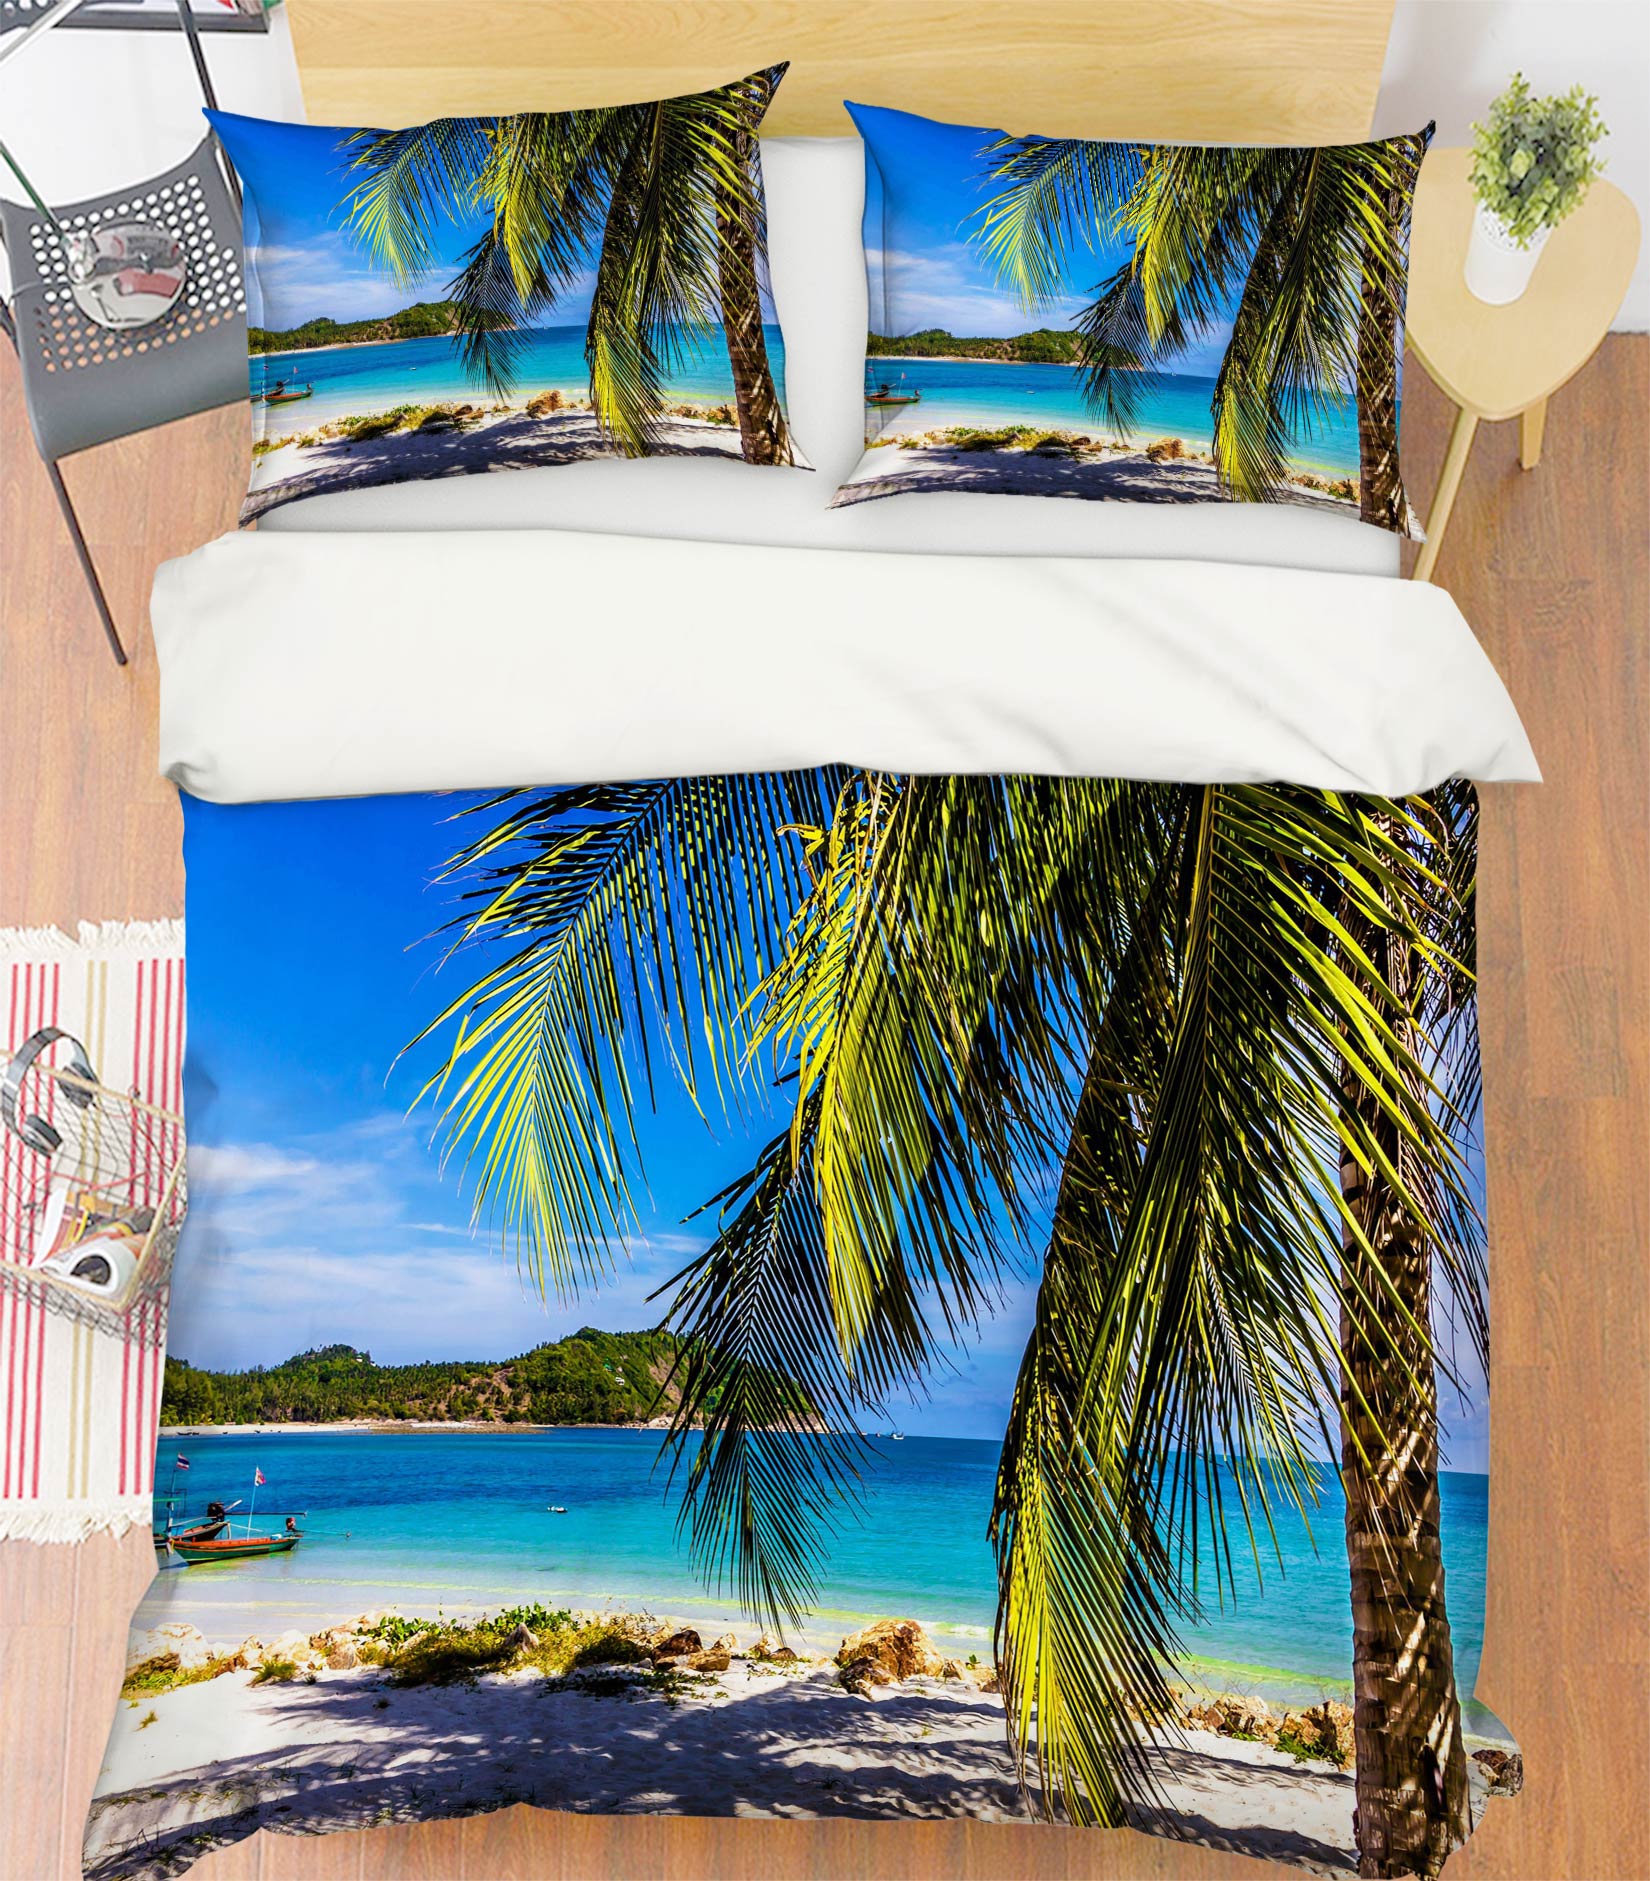 3D Beach Coconut Tree 67172 Bed Pillowcases Quilt